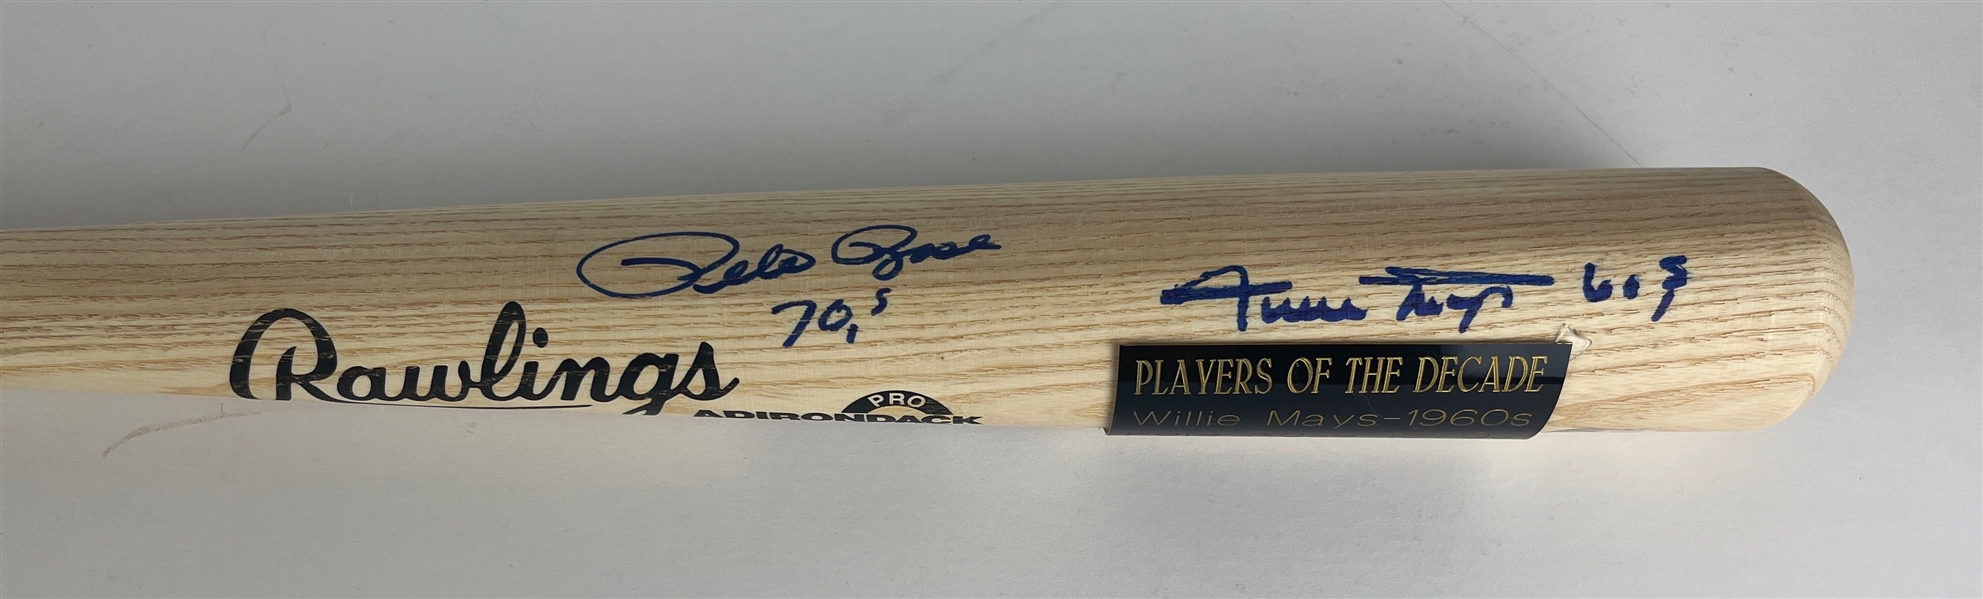 Mays, Rose, & Schmidt Signed 'Players of the Decade' Commemorative Bat (Beckett/BAS)